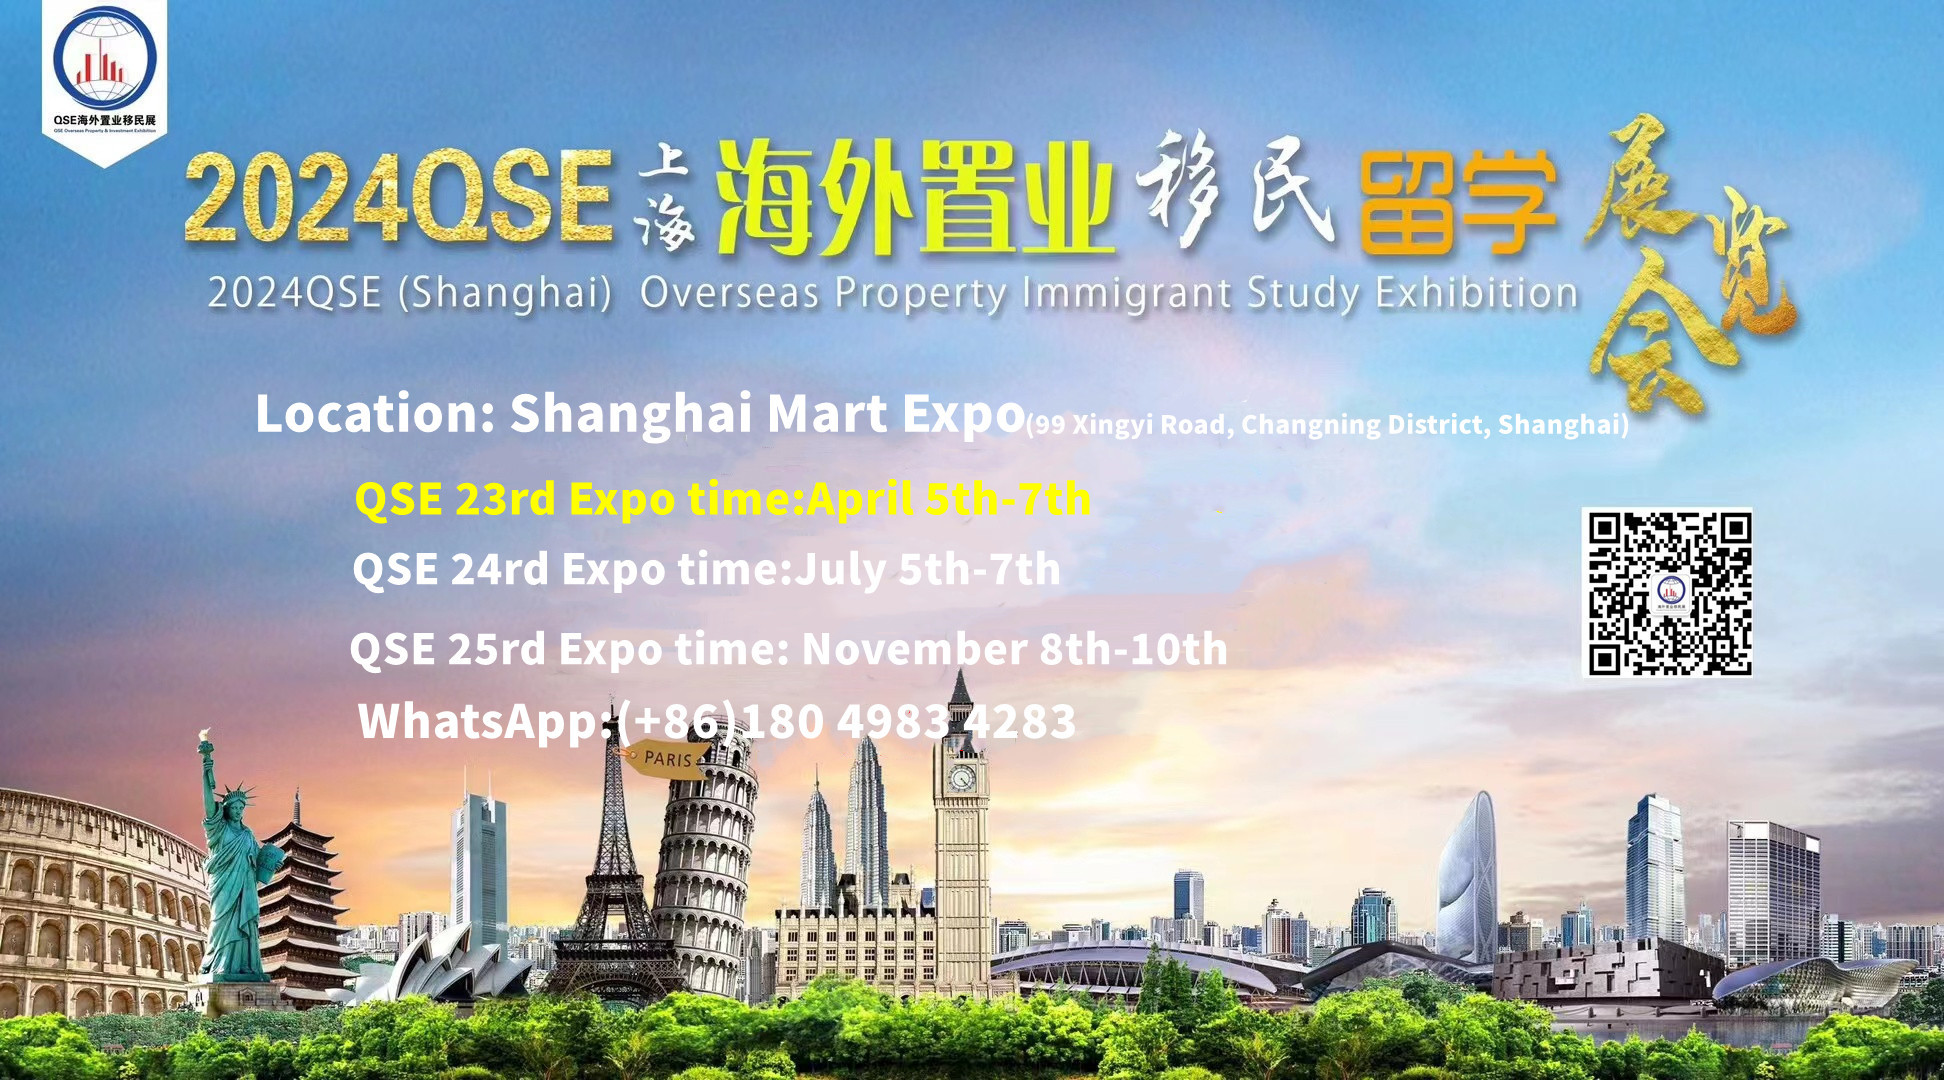 2024 Shanghai 23rd International Property & Investment Immigration Expo,2024 Shanghai 23st International Property Expo,Shanghai International Property Expo,Shanghai Investment Immigration Expo,2024 Shanghai Immigration Exhibition,2024 Shanghai Overseas Property Exhibition,Investment Immigration Expo,International Property Expo,oversea property exhibition,Overseas investment exhibition,property exhibition,Overseas Property Exhibition,Immigration and Study Abroad Exhibition,Investment Exhibition,Shanghai Study Abroad Exhibition,Overseas Property Immigration Exhibition,2024 Overseas Property Immigration Exhibition,Immigration Exhibition,Investment Immigration Exhibition,Study Abroad Exhibition,Overseas Property Exhibition,Real Estate Exhibition,Overseas Property Investment Exhibition,Shanghai Overseas Property Investment Exhibition,Shanghai Overseas Property Immigration and Study Abroad Exhibition,Shanghai Overseas Property Immigration and Study Abroad Exhibition,Overseas Property Exhibition,Shanghai Property Exhibition,Overseas Property Exhibition,Shanghai Overseas Real Estate Exhibition, Shanghai International Real Estate Exhibition, Shanghai Overseas Real Estate Investment Immigration Exhibition, Overseas Study Abroad Exhibition, Pension Real Estate Exhibition, Training and Education Exhibition, International Real Estate Exhibition, Real Estate Exhibition, China Real Estate Exhibition, Immigration and Study Abroad Exhibition, Study Abroad & Immigration Exhibition,Real Estate Fair,International Real Estate Exhibition,Overseas Real Estate Exhibition,China Real Estate Exhibition,International Real Estate Exhibition,High-end Real Estate Exhibition,Real Estate Shanghai Exhibition,Real Estate Shanghai Exhibition,China Real Estate Exhibition,Overseas Real Estate Exhibition,Overseas Property & Immigration Exhibition,Overseas Property & Study Exhibition,Overseas Property Expo,International Immigration & Study Abroad Exhibition,Shanghai International Property Exhibition,Shanghai Overseas Property & Immigration Exhibition,2024 Domestic Property Exhibition,Study Abroad Exhibition,2024 Investment Immigration Exhibition,2024 Beijing Immigration Exhibition,2024 Shanghai Immigration Abroad,2024 Overseas Study Exhibition Time Table,2024 Overseas Property Immigration and Study Abroad Exhibition,2024 Study Abroad Exhibition,Immigration and Study Abroad Exhibition 2024,2024 Shanghai Overseas Exhibition,2024 Shanghai Immigration Exhibition,2024 Shanghai Study Abroad Education Exhibition Time,2024 Study Abroad Exhibition,Study Abroad Exhibition,Study Abroad Exhibition 2024,Overseas Property Immigration Exhibition,2024 Shanghai Overseas Property Exhibition,2024 Shanghai Real Estate Exhibition,2024 Shanghai Overseas Real Estate Exhibition Schedule,Overseas Real Estate Exhibition,2024 (Shanghai Real Estate Exhibition),Immigration Expo,Venture Capital Immigration Exhibition,Investment Immigration and Study Abroad Exhibition,Immigration Real Estate Exhibition,Real Estate Exhibition,Shanghai Real Estate Exhibition,Shanghai Real Estate Exhibition,Shanghai Real Estate Exhibition,Shanghai Overseas Property Investment & Immigration & Study Abroad Exhibition,Guangzhou Overseas Property Exhibition,Australian Property Fair,Overseas Property Immigration & Study Exhibition,Overseas Property & Immigration Exhibition,Shanghai Overseas Real Estate Expo,International Immigration Expo,Shanghai Overseas Real Estate,Overseas Real Estate,Overseas Real Estate,Investment,Immigration,Real Estate Immigration,Real Estate International,International Real Estate,Immigration & Study,Study Abroad,Shanghai Overseas Real Estate,Shanghai Immigration,Immigration Shanghai,Apartment,International School,High-end Property,Pension Real Estate,Bank,Law Firm,International Commercial Real Estate Exhibition,Housing Exhibition,Tourism Real Estate,Global Real Estate Investment Exhibition,High-end Real Estate Investment Exhibition,Villa,Resort Hotel,Castle,Ski Villa,Marina,Sea View Room,Tourism Real Estate,Overseas Immigration Agency,Consulting Service Agency,Investment Immigration,Intermediary Agency,EB-5 Regional Center,Finance,Private Equity Firms,Immigration Services,Shanghai Immigration Exhibition,Shanghai Overseas Property Expo,2024 Shanghai 23rd Overseas Property Immigration and Study Abroad Exhibition,2024 Immigration Exhibition,2024 Investment Immigration Exhibition,2024 Study Abroad Expo,2024 Overseas Property Exhibition,2024 Overseas Property Exhibition,2024 Overseas Property Investment Exhibition,2024 Shanghai Overseas Property Investment Exhibition,2024 International Overseas Property Immigration Investment and Study Abroad Exhibition,2024 Shanghai Overseas Property Immigration & Study Abroad Exhibition,2024 Overseas Property Exhibition,2024 International Property Exhibition,2024 Shanghai Property Exhibition,2024 Overseas Property Exhibition,2024 Shanghai Overseas Property Exhibition,2024 Shanghai International Property Exhibition,2024 Shanghai Overseas Property Investment & Immigration Exhibition,2024 Overseas Study Expo,2024 Senior Property Exhibition,2024 Training and Education Exhibition,2024 International Property Exhibition,2024 Property Exhibition,2024 China Property Exhibition,2024 Immigration & Study Expo,2024 Overseas Property Fair,2024 International Property Fair,2024 Overseas Property Exhibition,2024 China Property Expo,2024 International Property Expo,2024 High-end Property Expo,2024 Property Shanghai Exhibition,2024 Property Shanghai Exhibition,2024 China Property Expo,2024 China Property Expo,2024 Overseas Property Immigration Exhibition,2024 Overseas Property Fair,2024 Overseas Property Expo,2024 International Immigration & Study Expo,2024 Shanghai International Property Expo,2024 Shanghai Study Abroad Expo,2024 China Overseas Property Expo,2024 Immigration & Property Expo,2024 Venture Capital & Immigration Exhibition,2024 Investment Immigration & Study Abroad Expo,2024 Immigration & Property Expo,2024 Real Estate Exhibition,2024 Shanghai Real Estate Exhibition,2024 Shanghai Real Estate Exhibition,2024 Shanghai Real Estate Exhibition,2024 Shanghai Real Estate Exhibition,2024 Shanghai Real Estate Exhibition,2024 Shanghai Real Estate Exhibition,2024 Shanghai Real Estate Exhibition,2024 Shanghai Real Estate Exhibition,2024 Shanghai Real Estate Exhibition,2024 Shanghai Real Estate Exhibition,2024 Shanghai Real Estate Exhibition,2024 Shanghai Real Estate Exhibition,2024 Shanghai Real Estate Exhibition,2024 Shanghai Real Estate Exhibition,2024 Shanghai Real Estate Exhibition,2024 Shanghai Real Estate Exhibition,2024 Shanghai Real Estate Exhibition,2024 Shanghai Real Estate Exhibition,2024 Shanghai Real Estate Exhibition,2024 Shanghai Real Estate Exhibition,2024 Shanghai Real Estate Exhibition,2024 Shanghai Real Estate Exhibition,2024 Shanghai Real Estate Exhibition,2024 Shanghai Real Estate Exhibition,2024 Shanghai Real Estate Exhibition,2024 Shanghai Real Estate Exhibition2024 Real Estate Fair,2024 Shanghai Real Estate Website,2024 Shanghai International Overseas Property Exhibition,2024 Shanghai Real Estate Exhibition,2024 Shanghai Real Estate Fair,2024 Shanghai Overseas Property Investment Immigration and Study Abroad Exhibition,2024 Guangzhou Overseas Property Exhibition,2024 Australian Property Fair,2024 Overseas Property Immigration Exhibition,2024 Overseas Property Immigration Exhibition,2024 Shanghai Overseas Real Estate Expo,2024 International Immigration Expo,www.opiexpo.com,opiexpo.com,2024(Shanghai)The 23st Overseas real estate Immigrant study abroad Exhibition,Overseas Real Estate Exhibition,Overseas Property Exhibition,Overseas Real Estate Investment Exhibition,Immigration Summit Forum,Shanghai High-end Real Estate Immigrant Investment Summit,2024 Shanghai Study Abroad Exhibition,Study Abroad Education Exhibition,Shanghai Study Abroad Fair,Shanghai Overseas Study Fair,Real Estate Exhibition,Shanghai Immigration Exhibition,SHANGHAI OVERSEAS PROPERTY-IMMIGRATION-INVESTMENT EXHIBITION - SHANGHAI EXPO